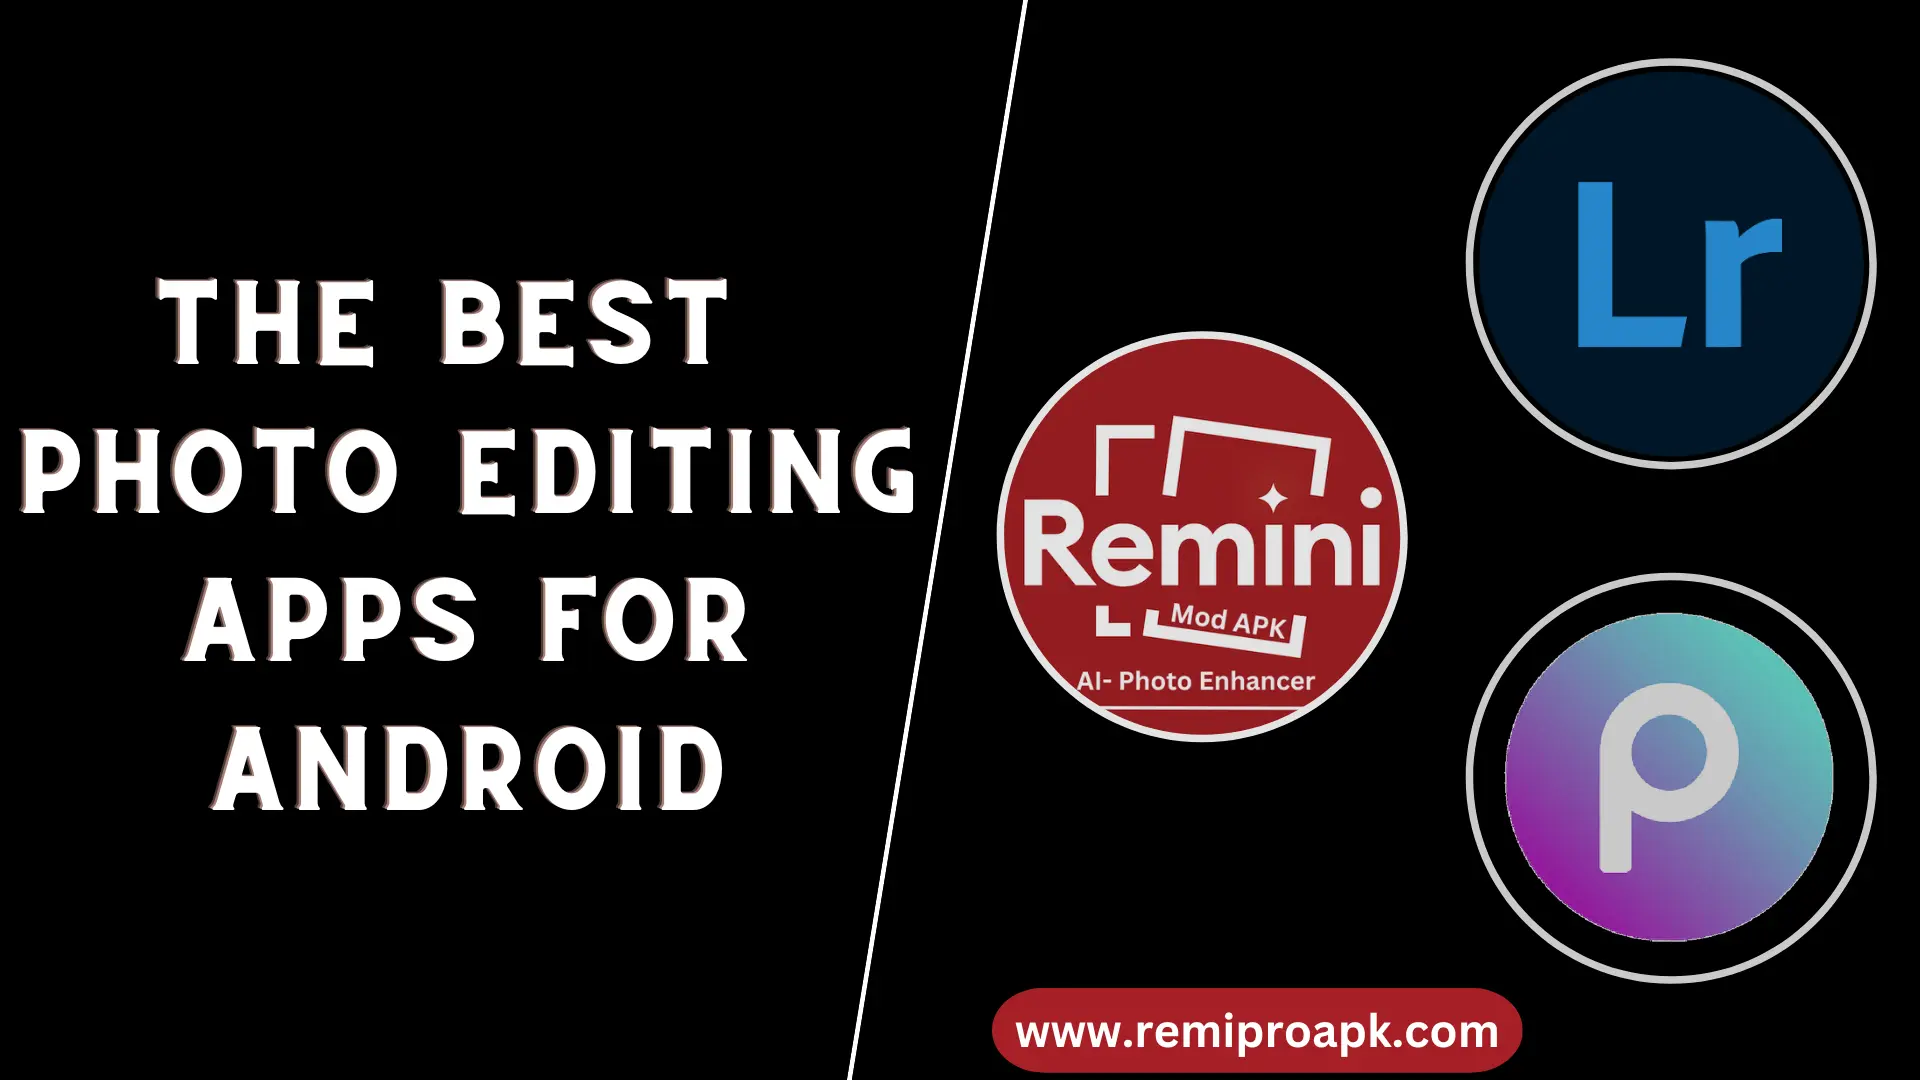 best photo editing apps for android - featured image